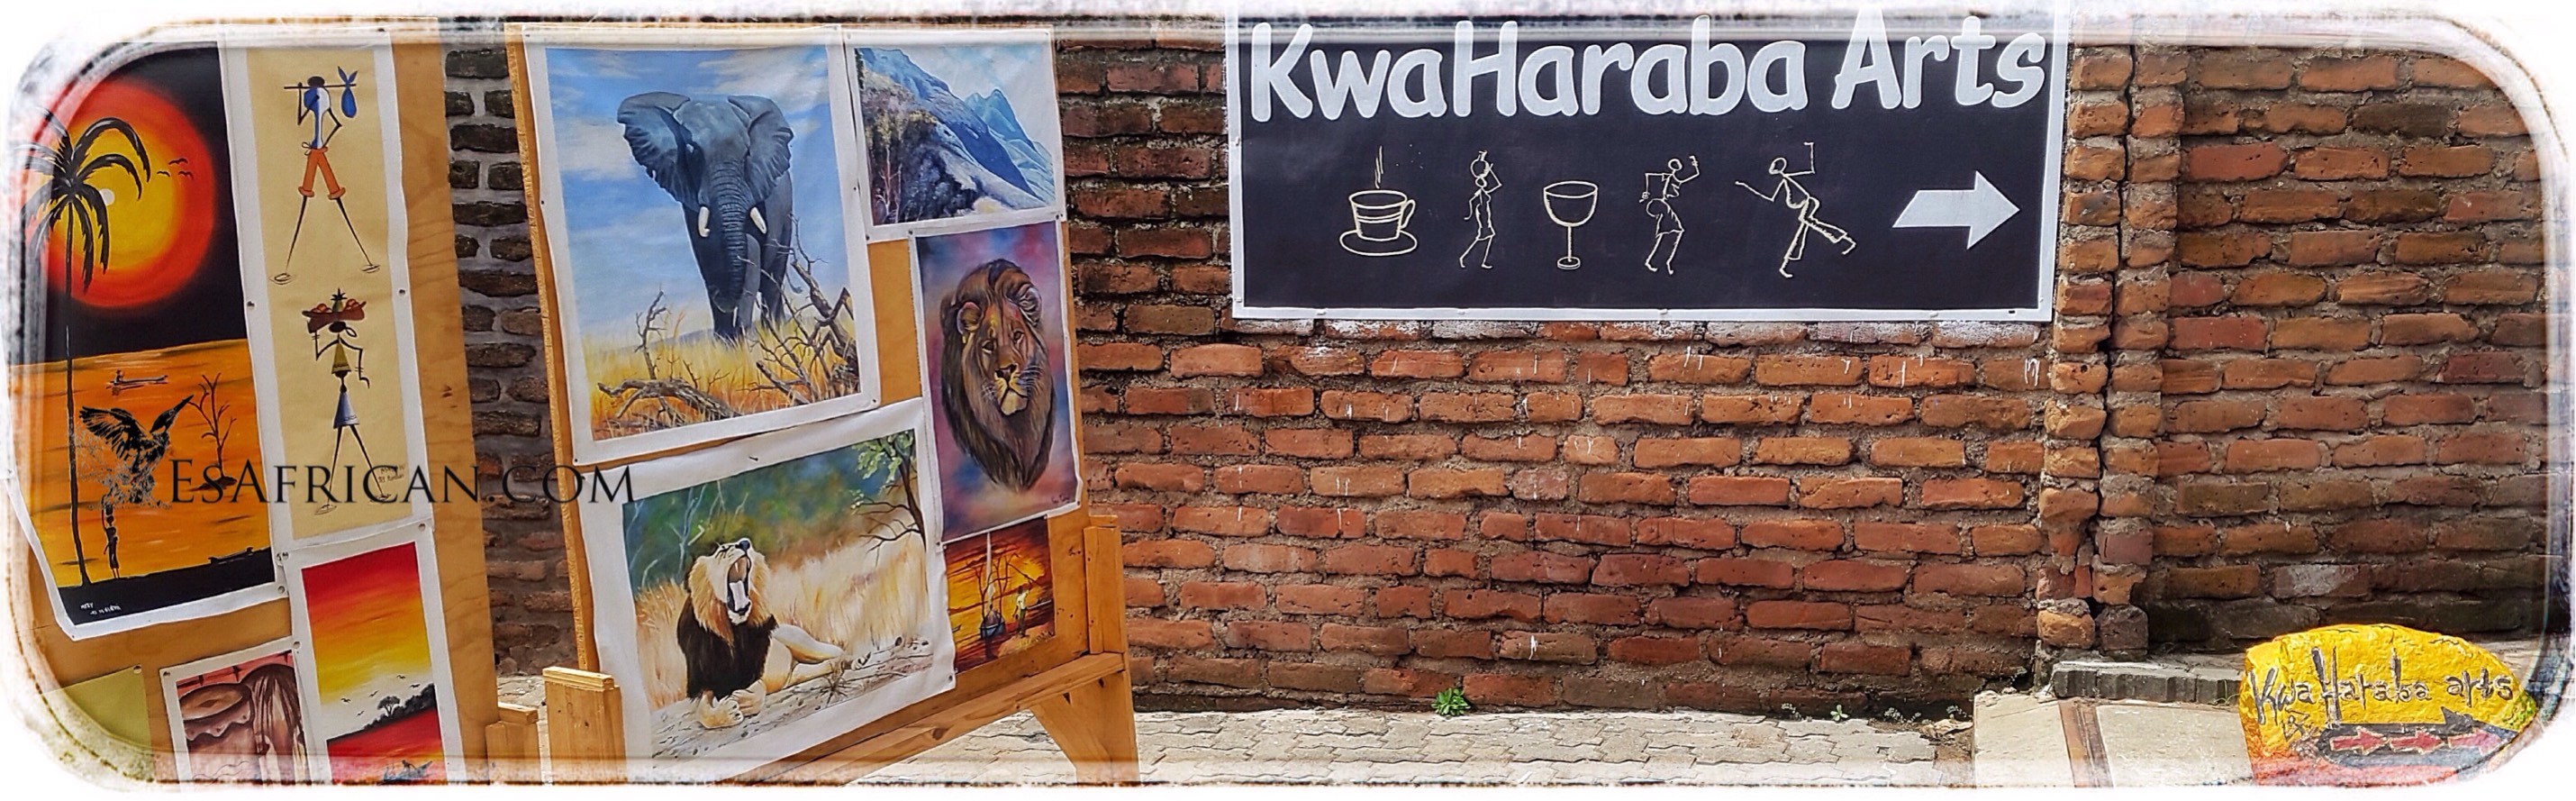 The Entrance to Kwa Haraba Arts Cafe in Blantyre